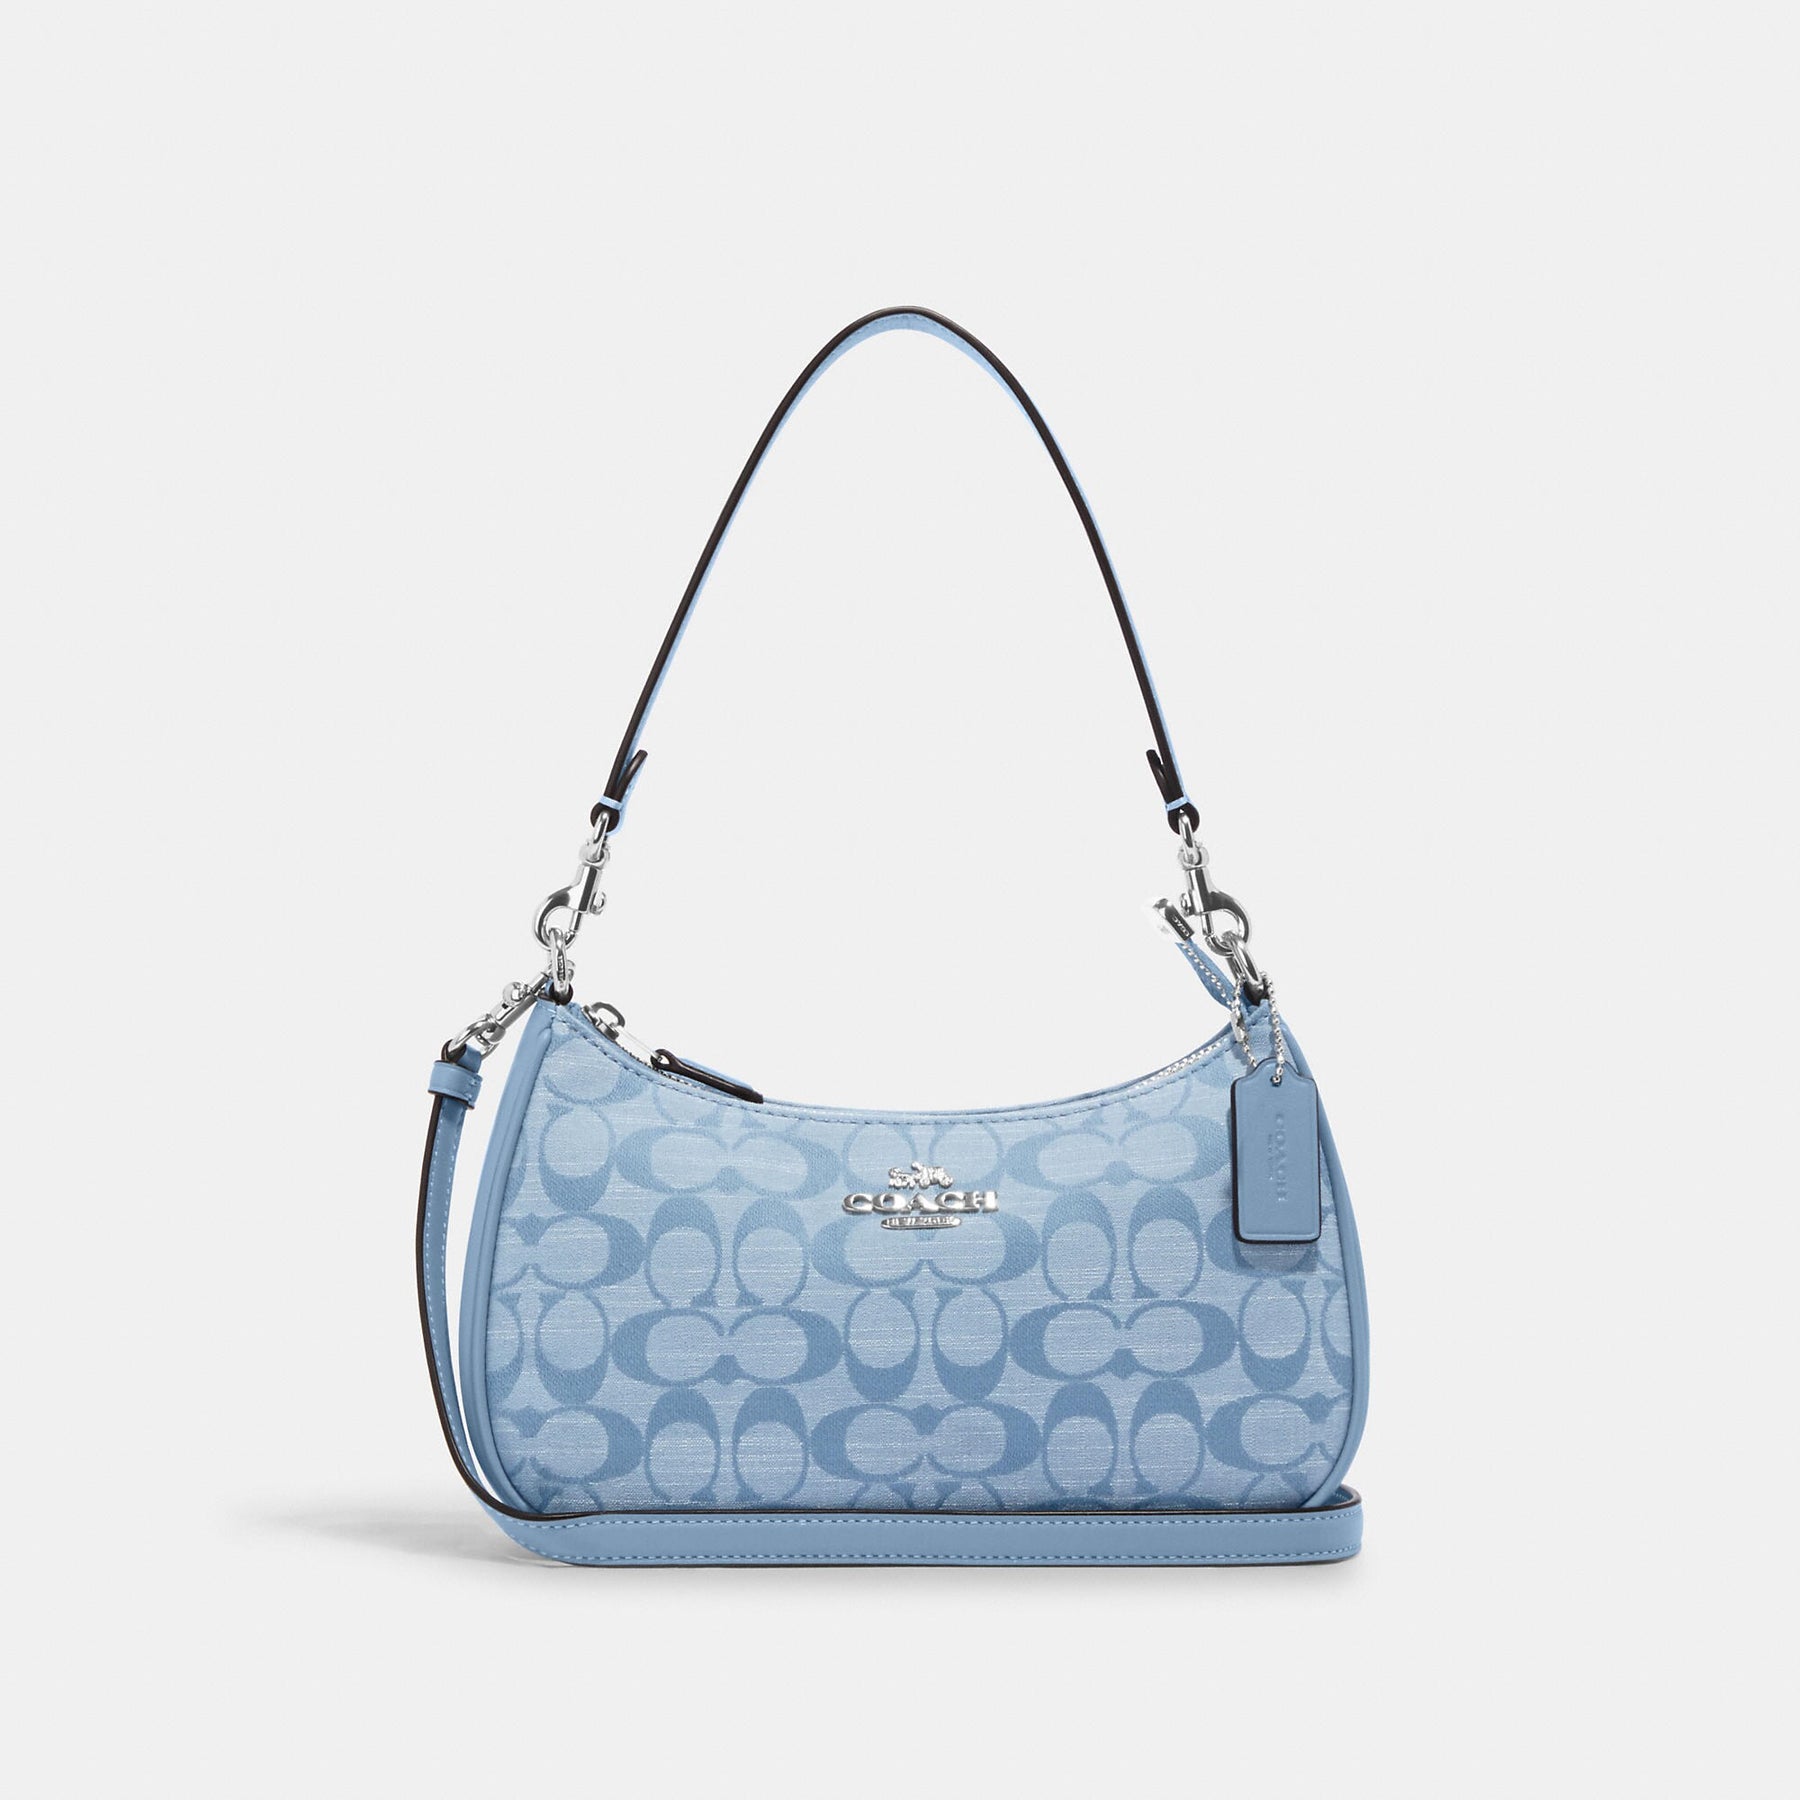 This Crossbody Bag Is 69% Off at